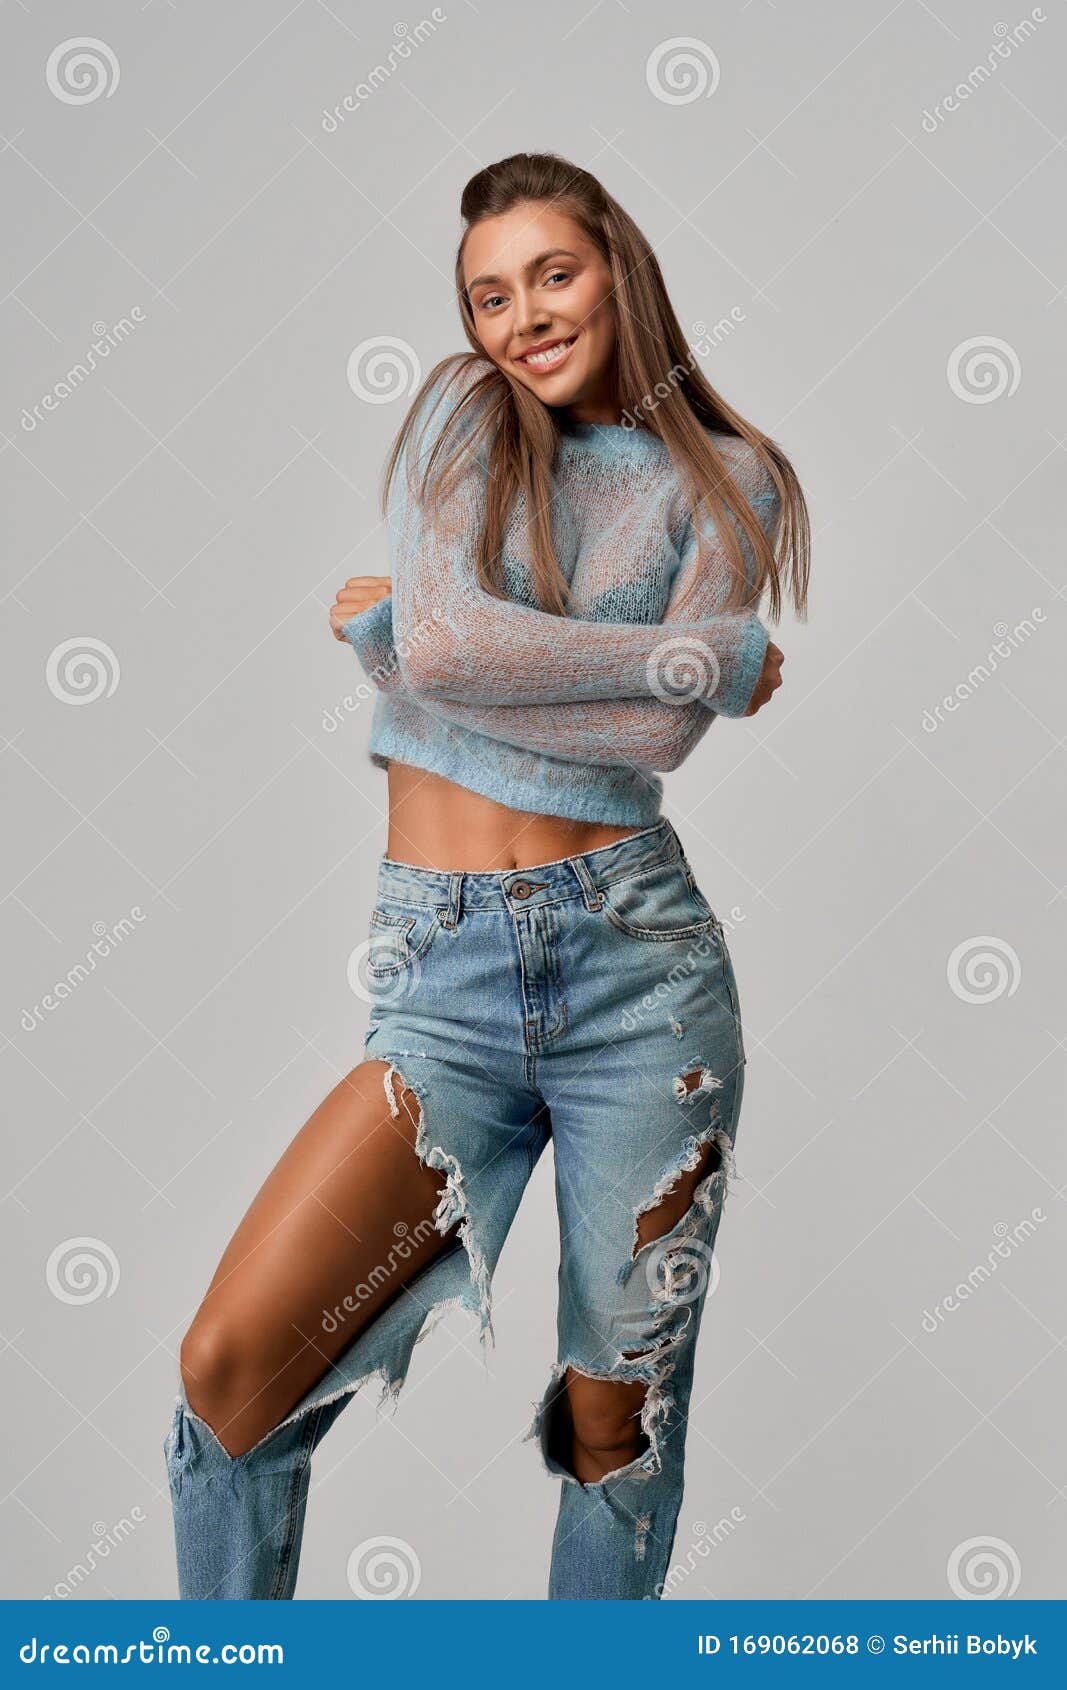 høflighed span London Smiling Girl Hugging Herself in Short Top, Ripped Jeans. Stock Photo -  Image of sunburnt, cheerful: 169062068